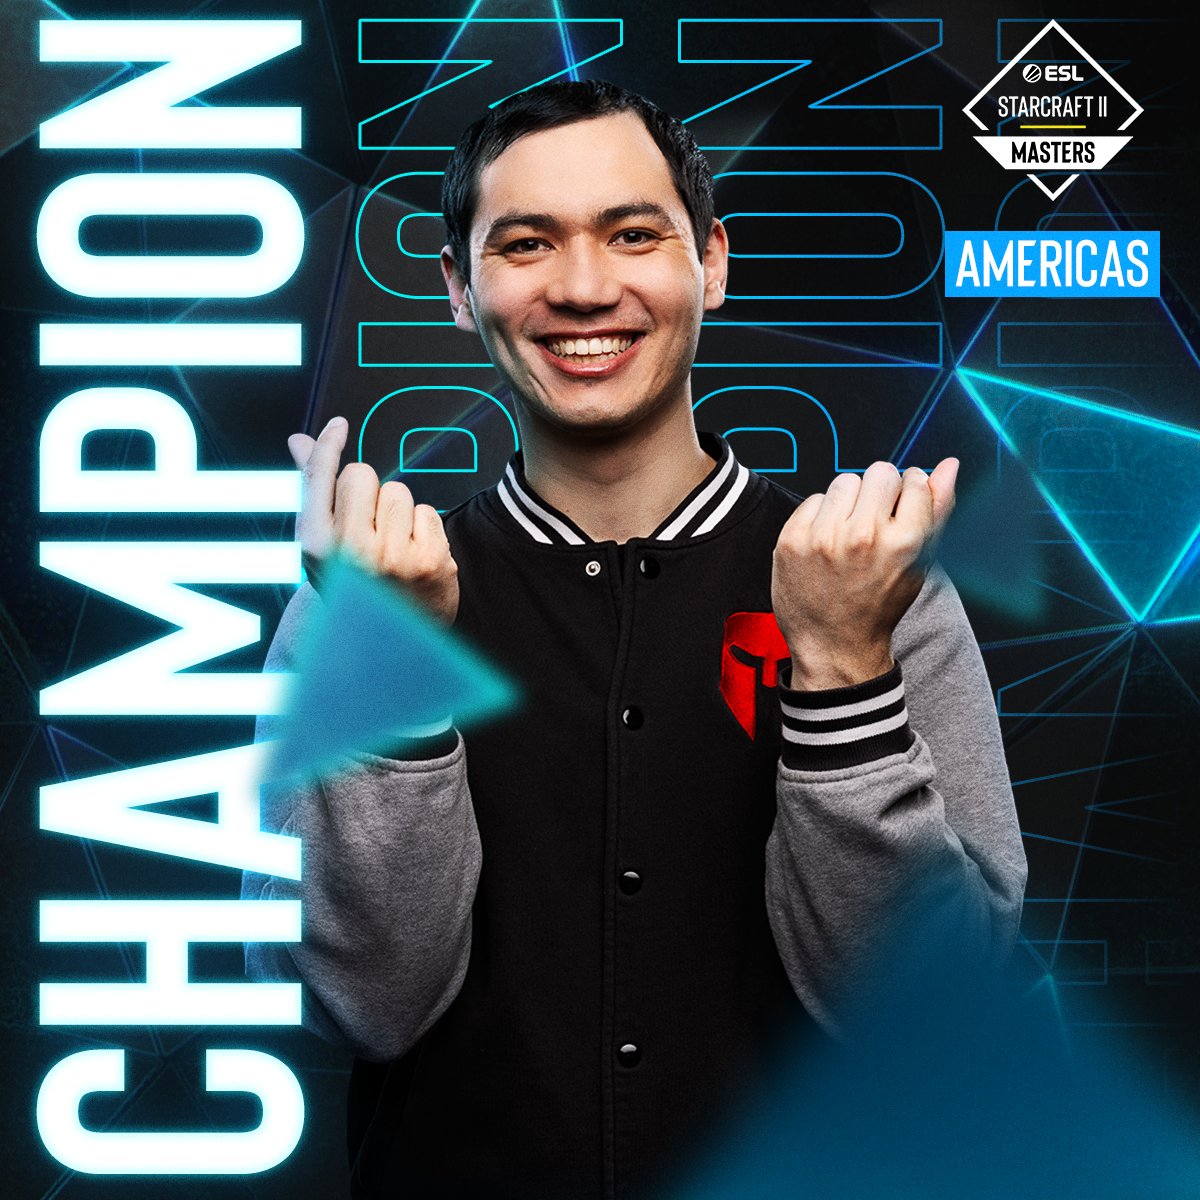 🏆🏆 AND THERE YOU HAVE YOUR AMERICAS REGIONAL CHAMPION 🏆🏆 Another championship under his belt, @SCAstrea completes the lower bracket run with a 4-3 over Trigger in a turnaround for the ages! 👏👏👏